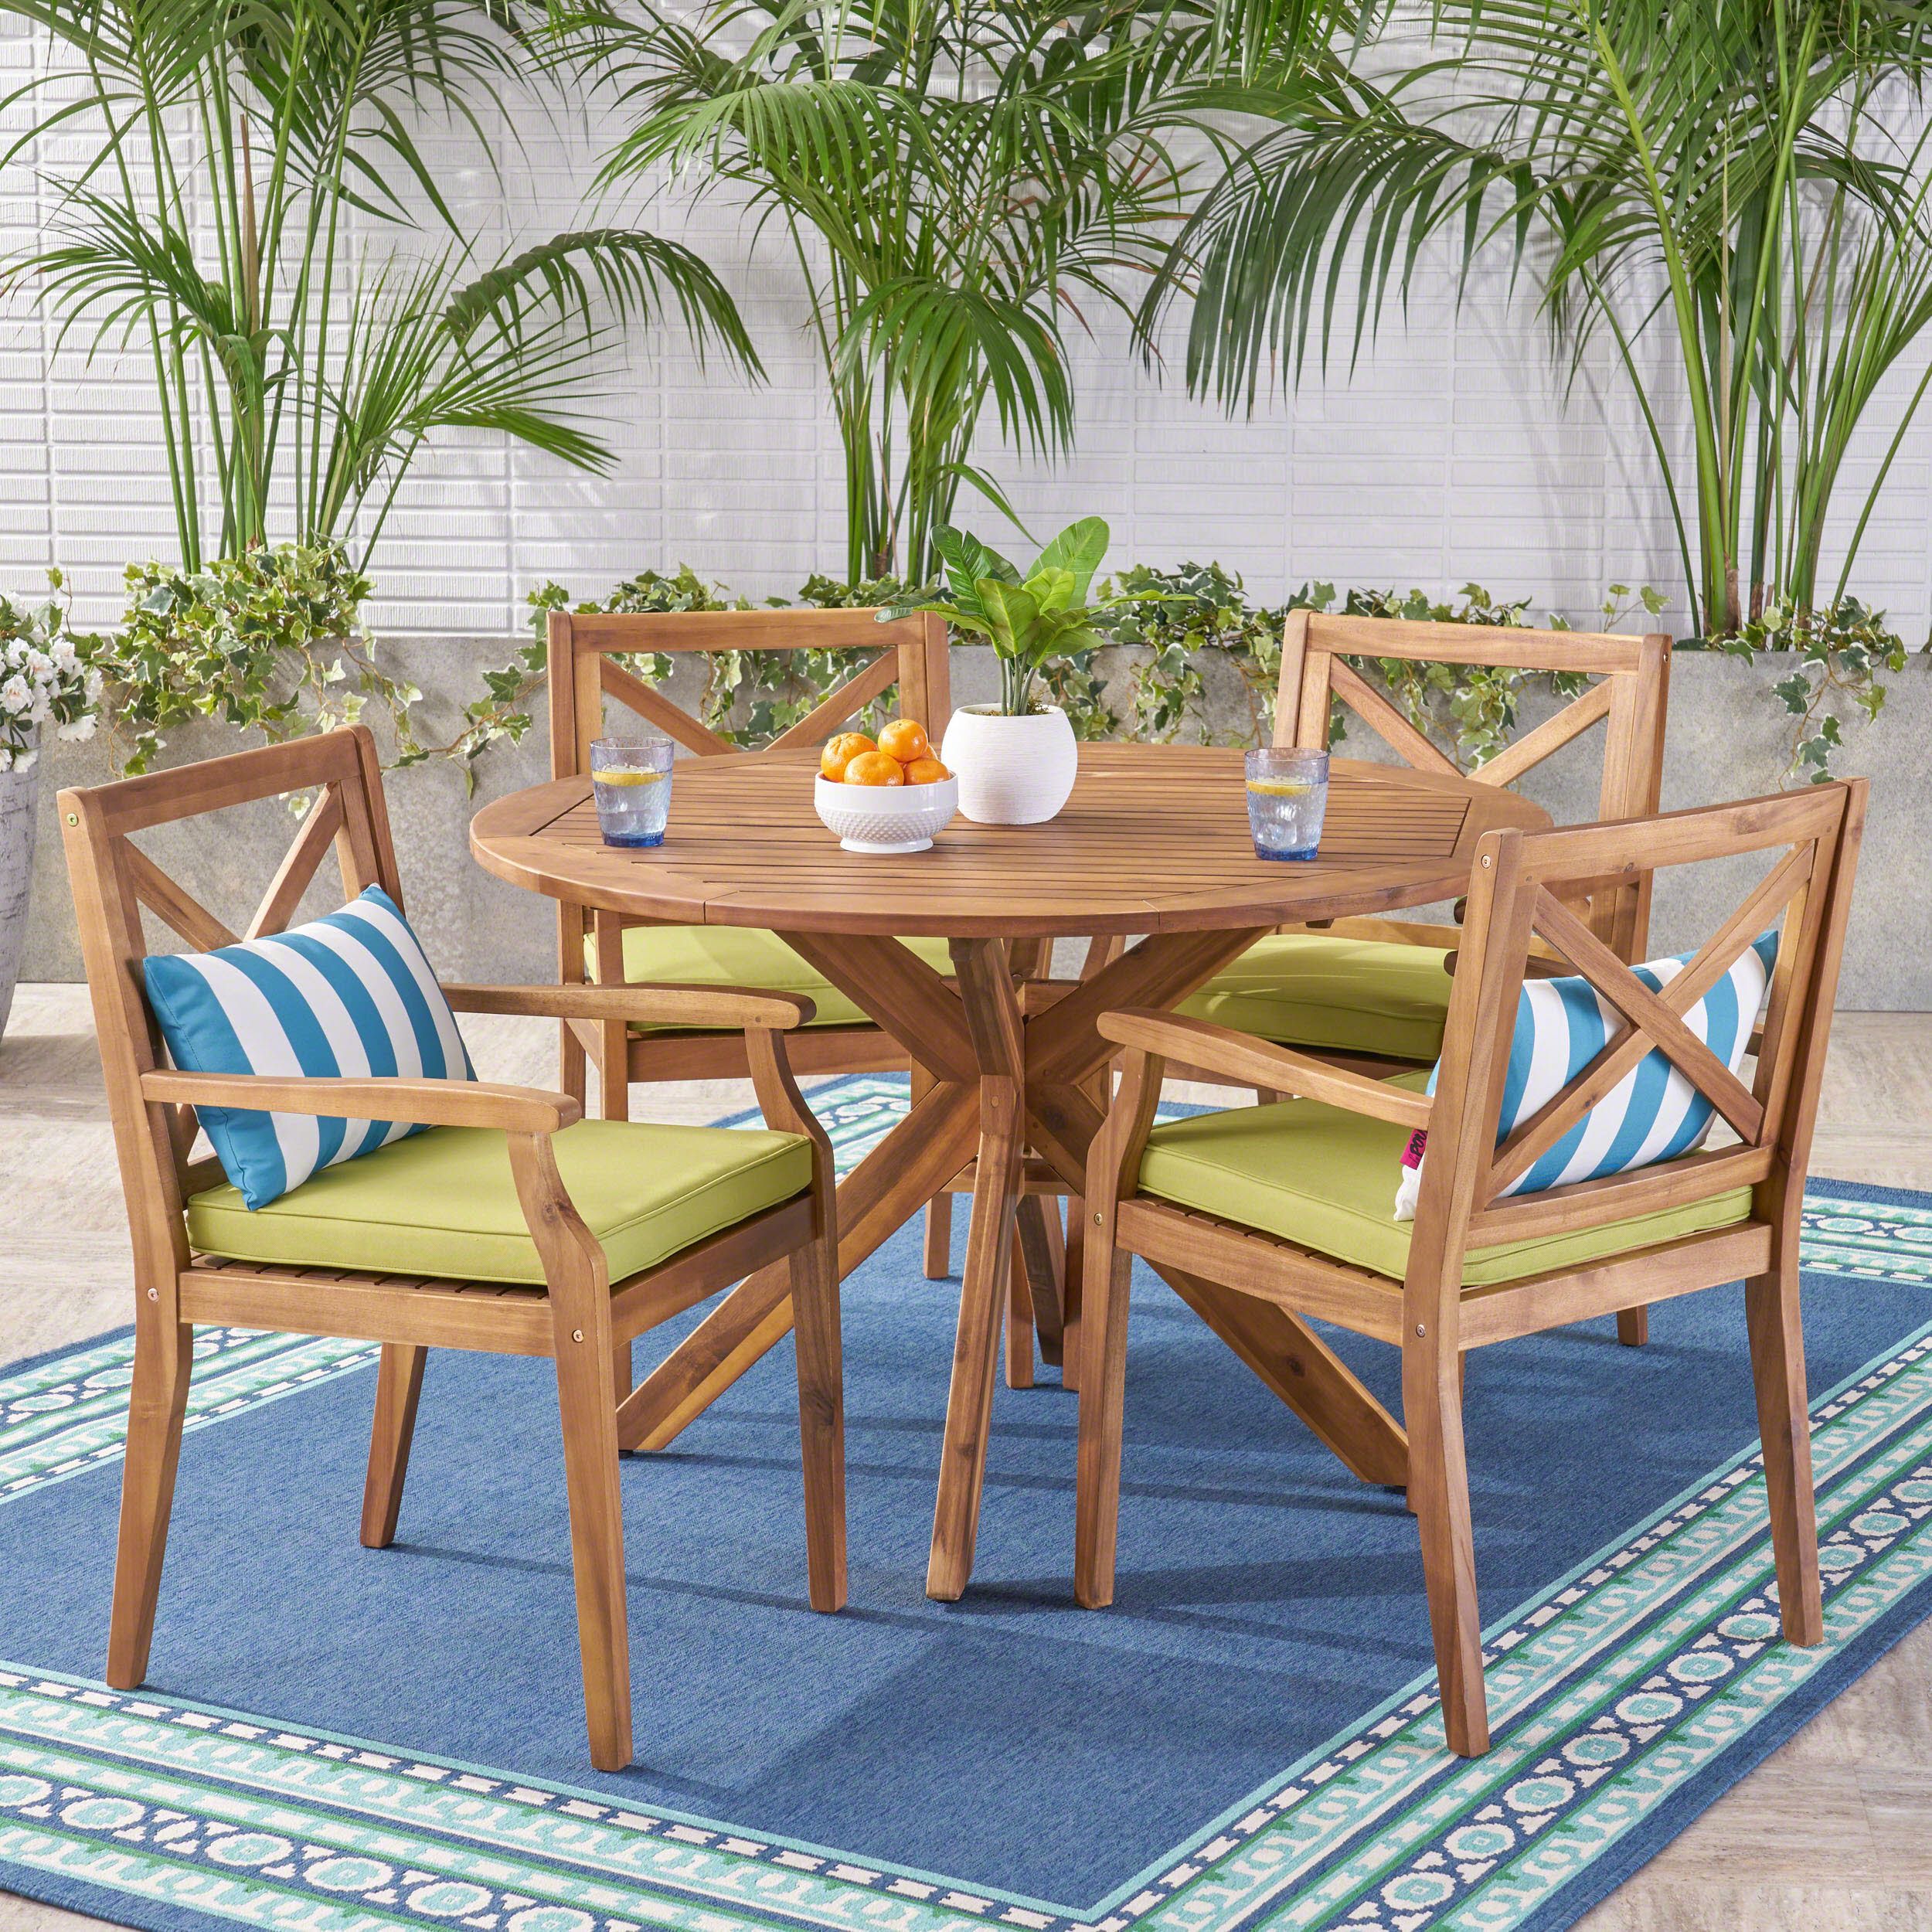 Oakley Outdoor 5 Piece Acacia Wood Round Dining Set With Cushions, Teak Regarding Round 5 Piece Outdoor Patio Dining Sets (View 2 of 15)